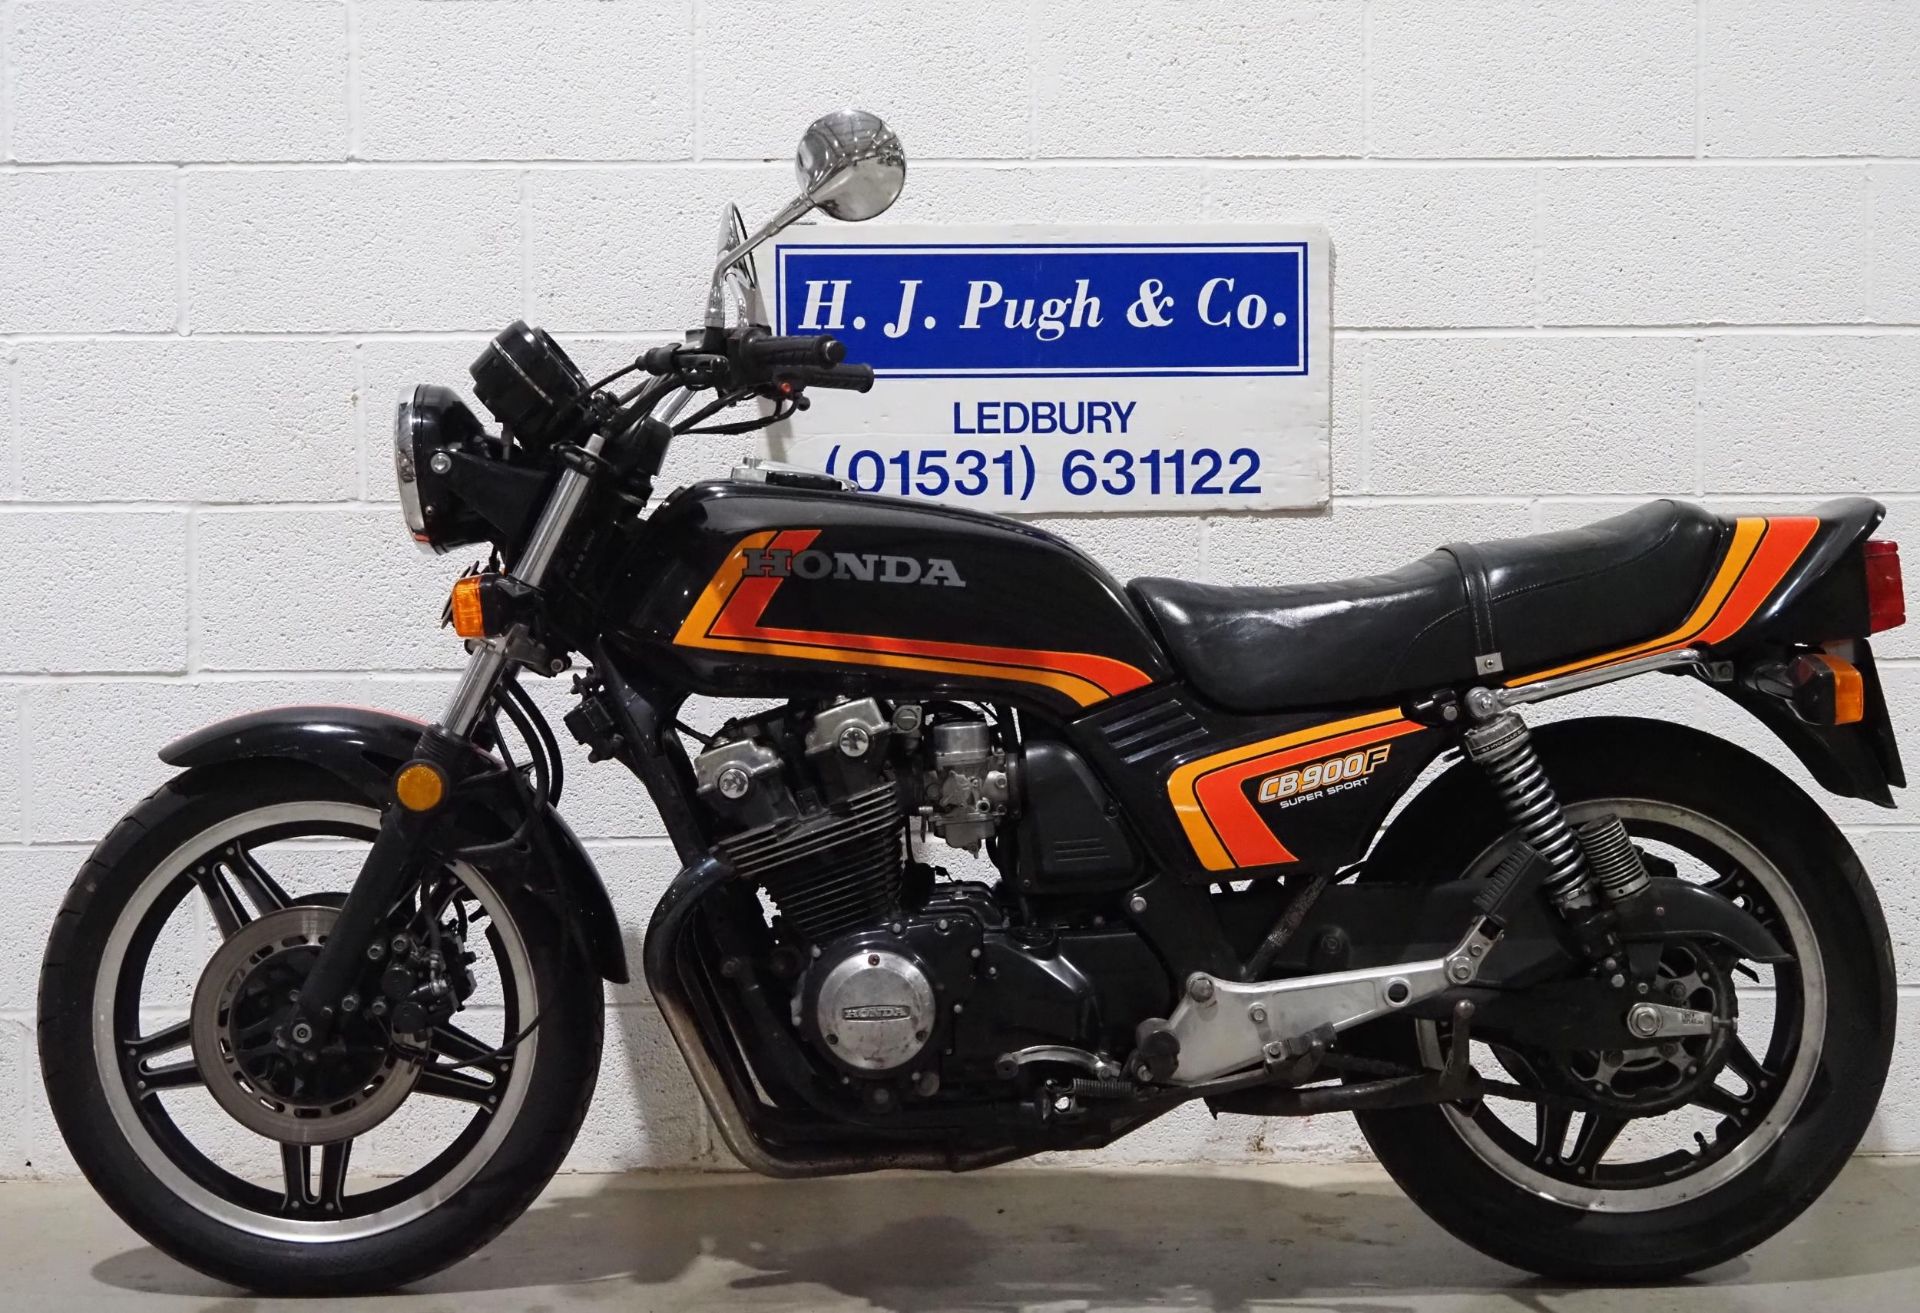 Honda CB900F SuperSport motorcycle. 1982. 901cc. Runs and rides. Recent new tyres. Comes with MOT - Image 6 of 6